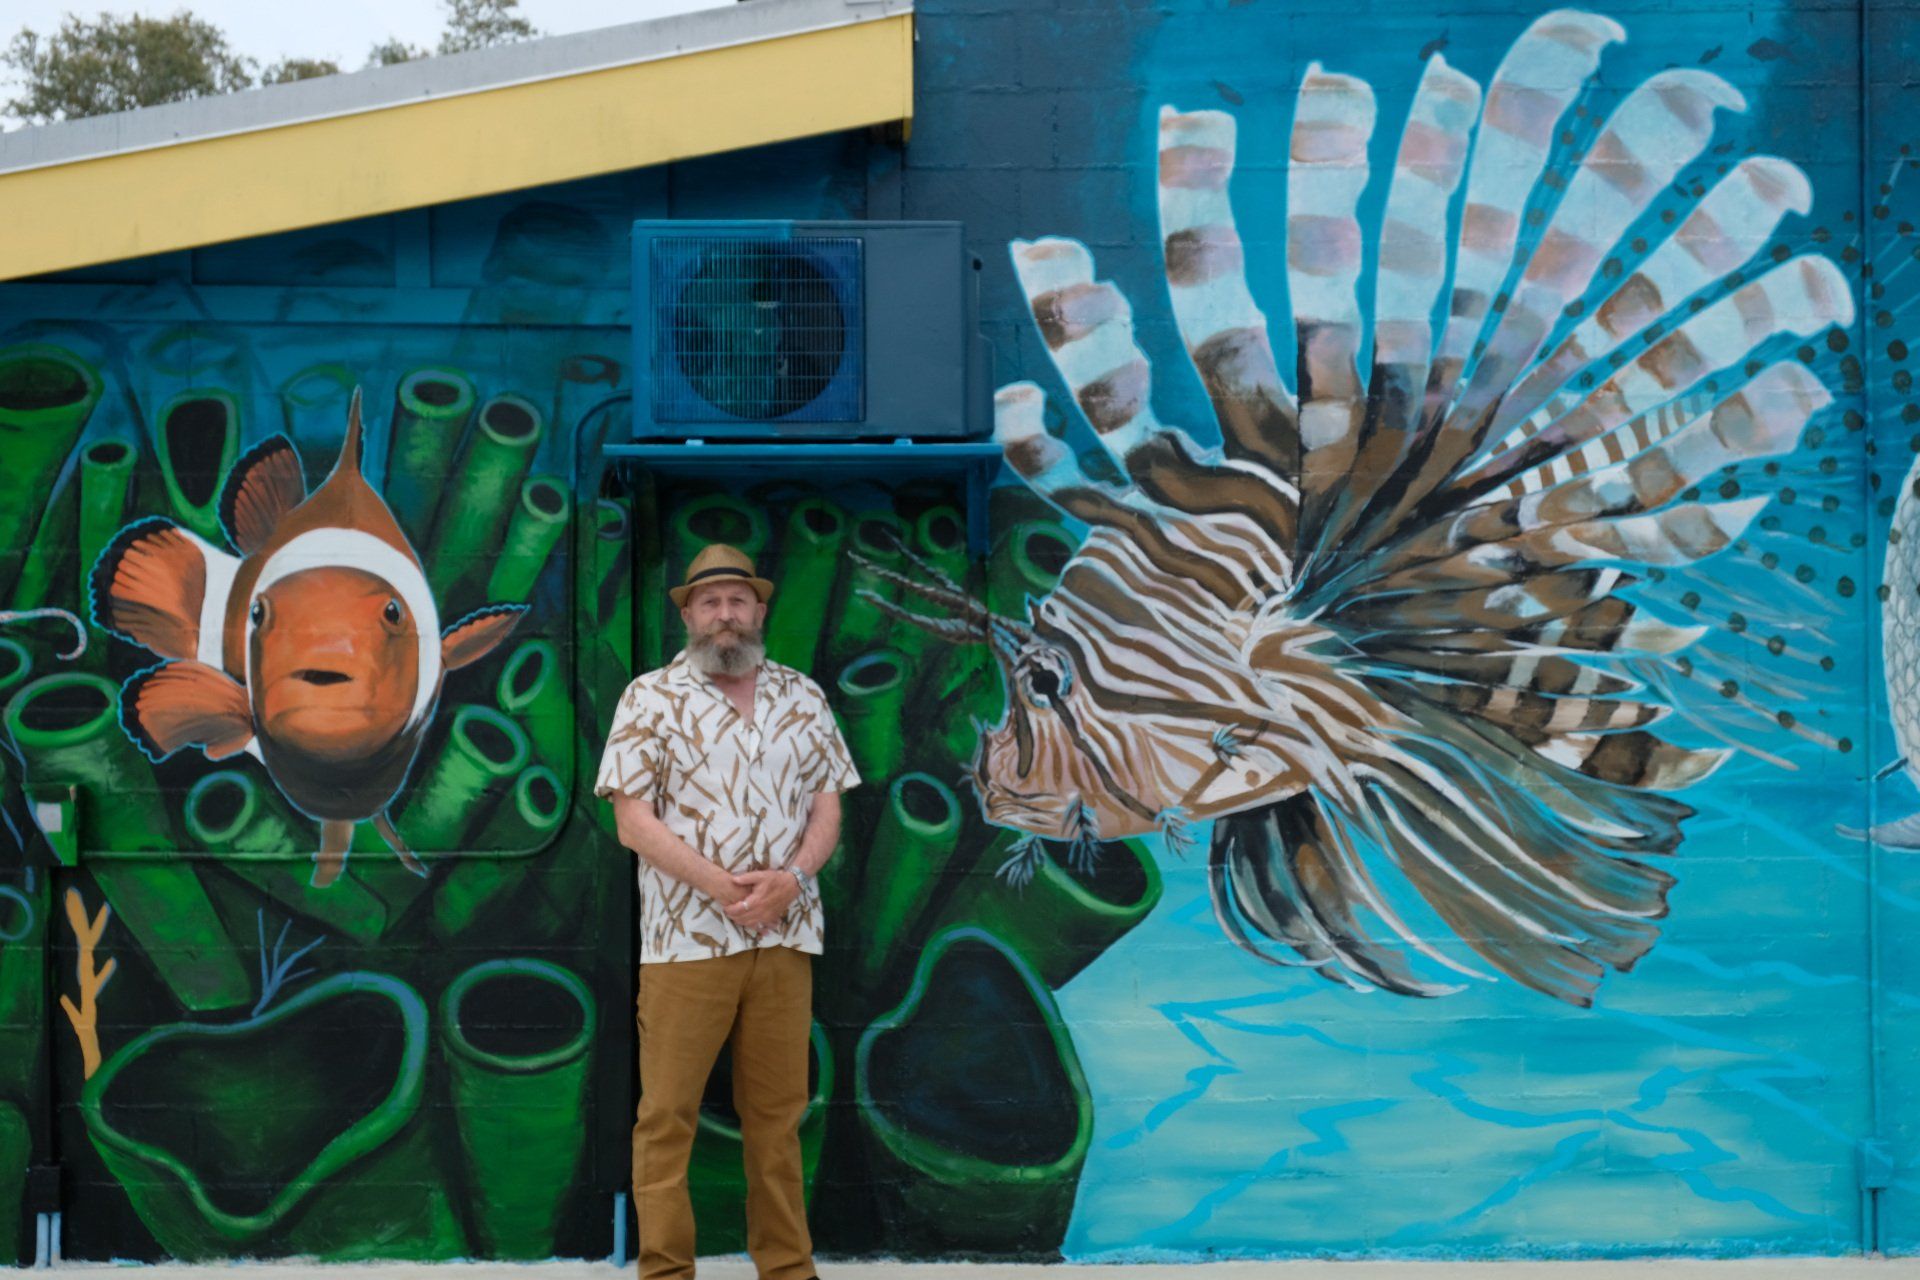 E. Allen Warren painted this sea life mural at Tacky Jacks in Gulf Shores, Alabama.